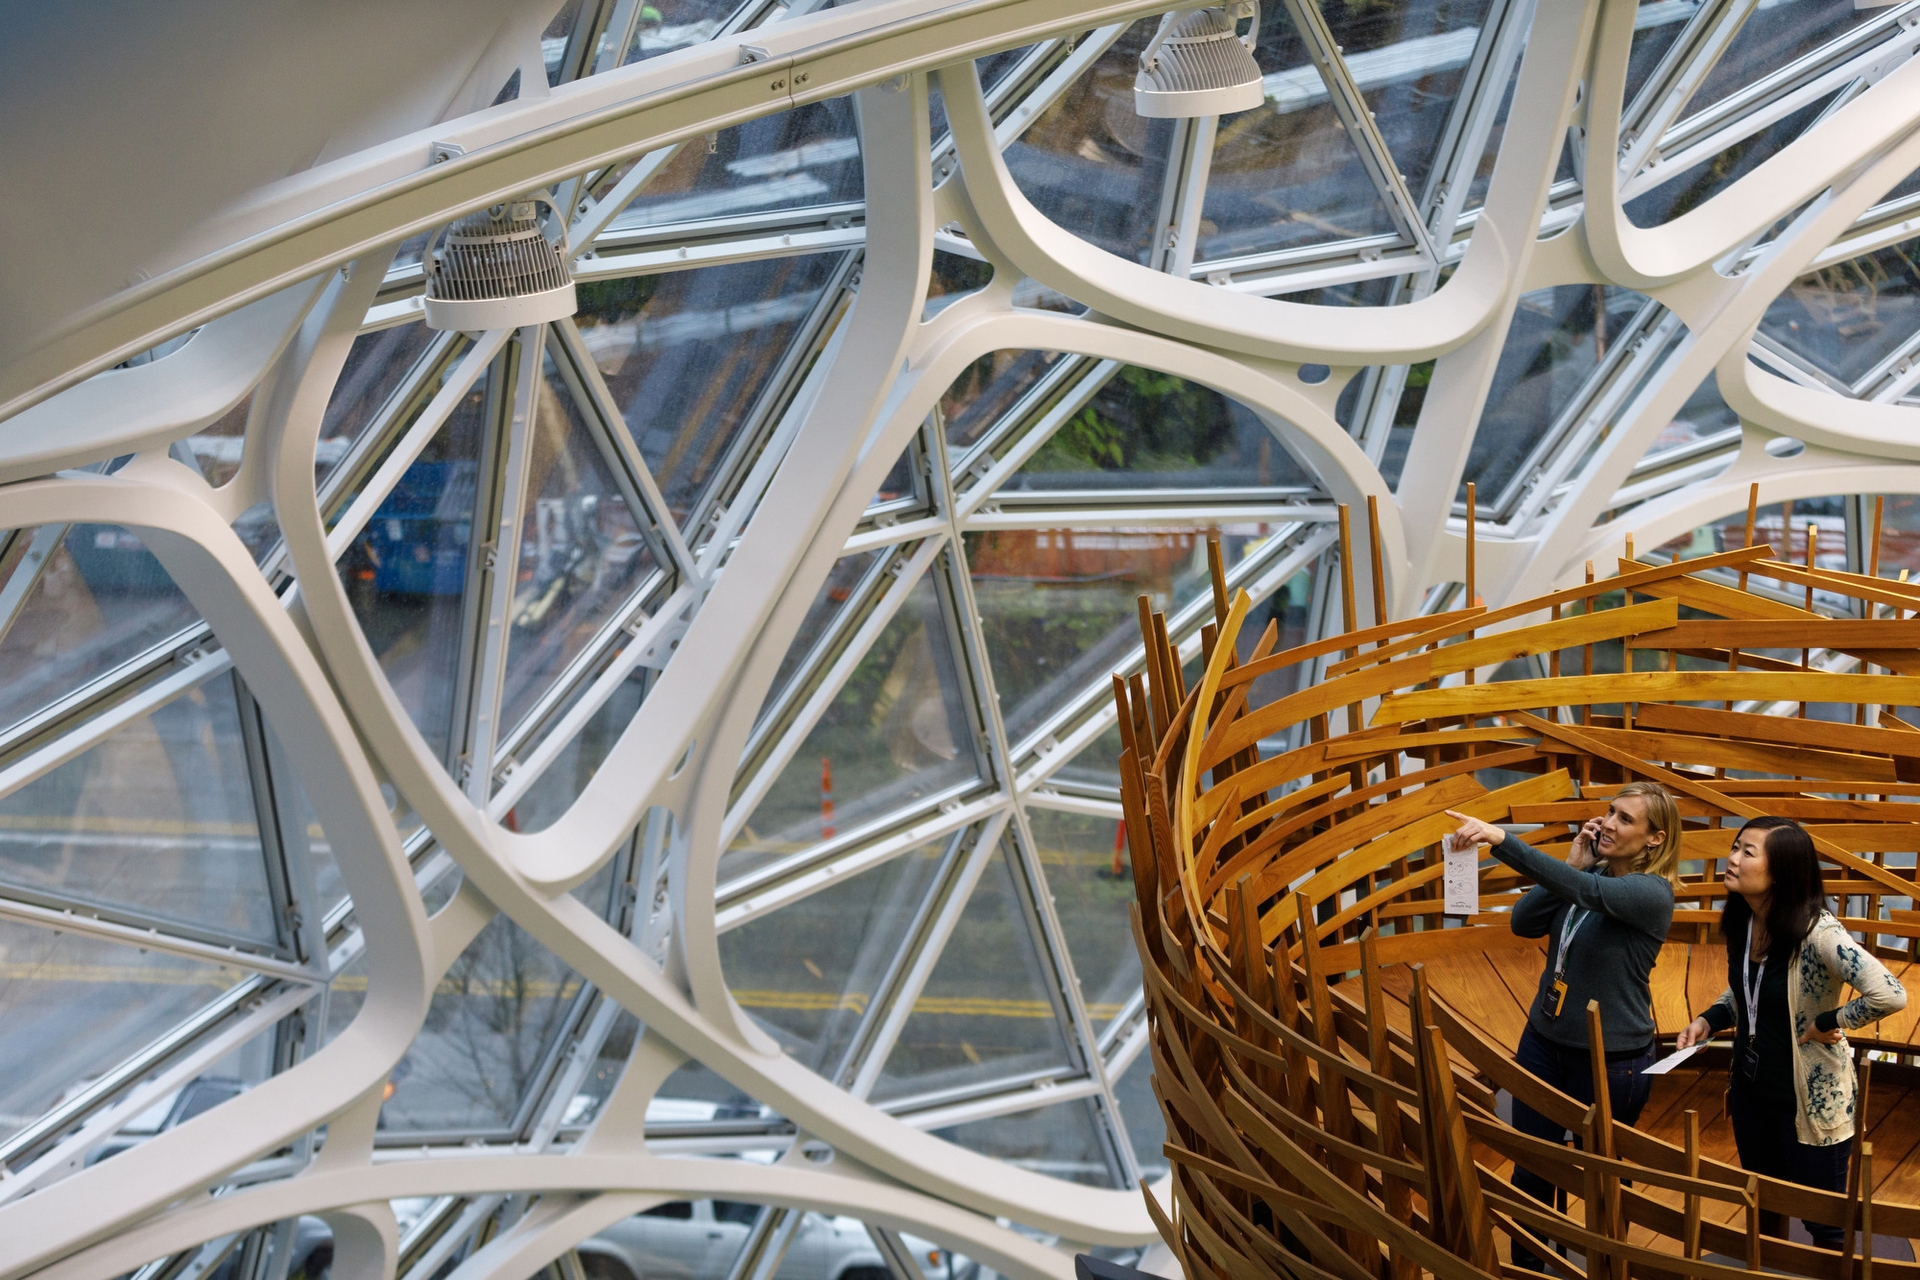 Two women stand in The Nest within the Amazon Spheres on opening day.